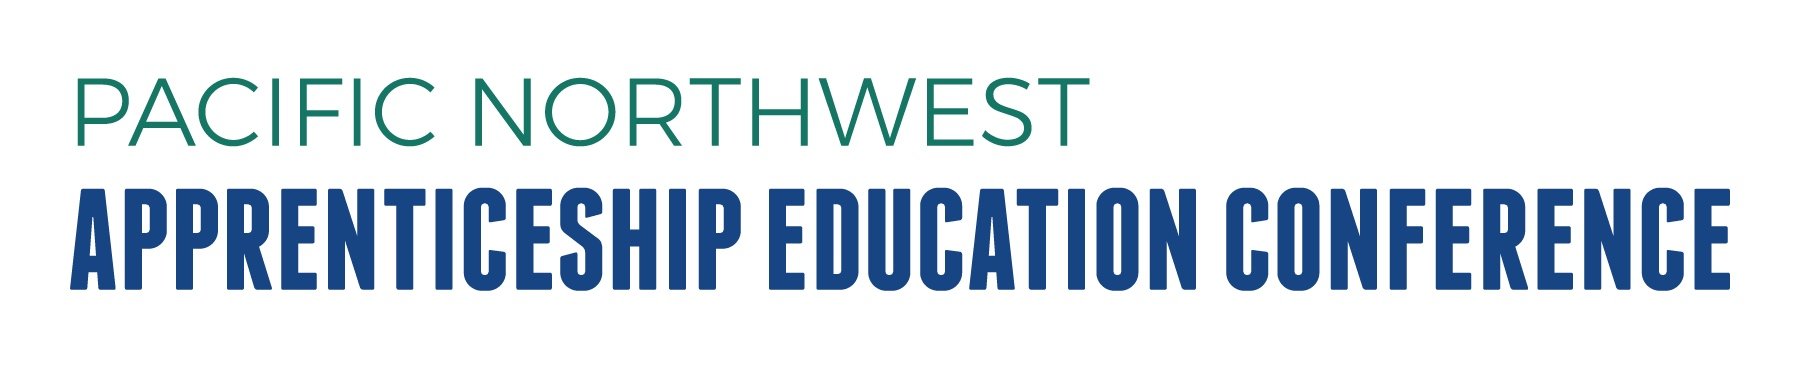 Pacific Northwest Apprenticeship Education Conference